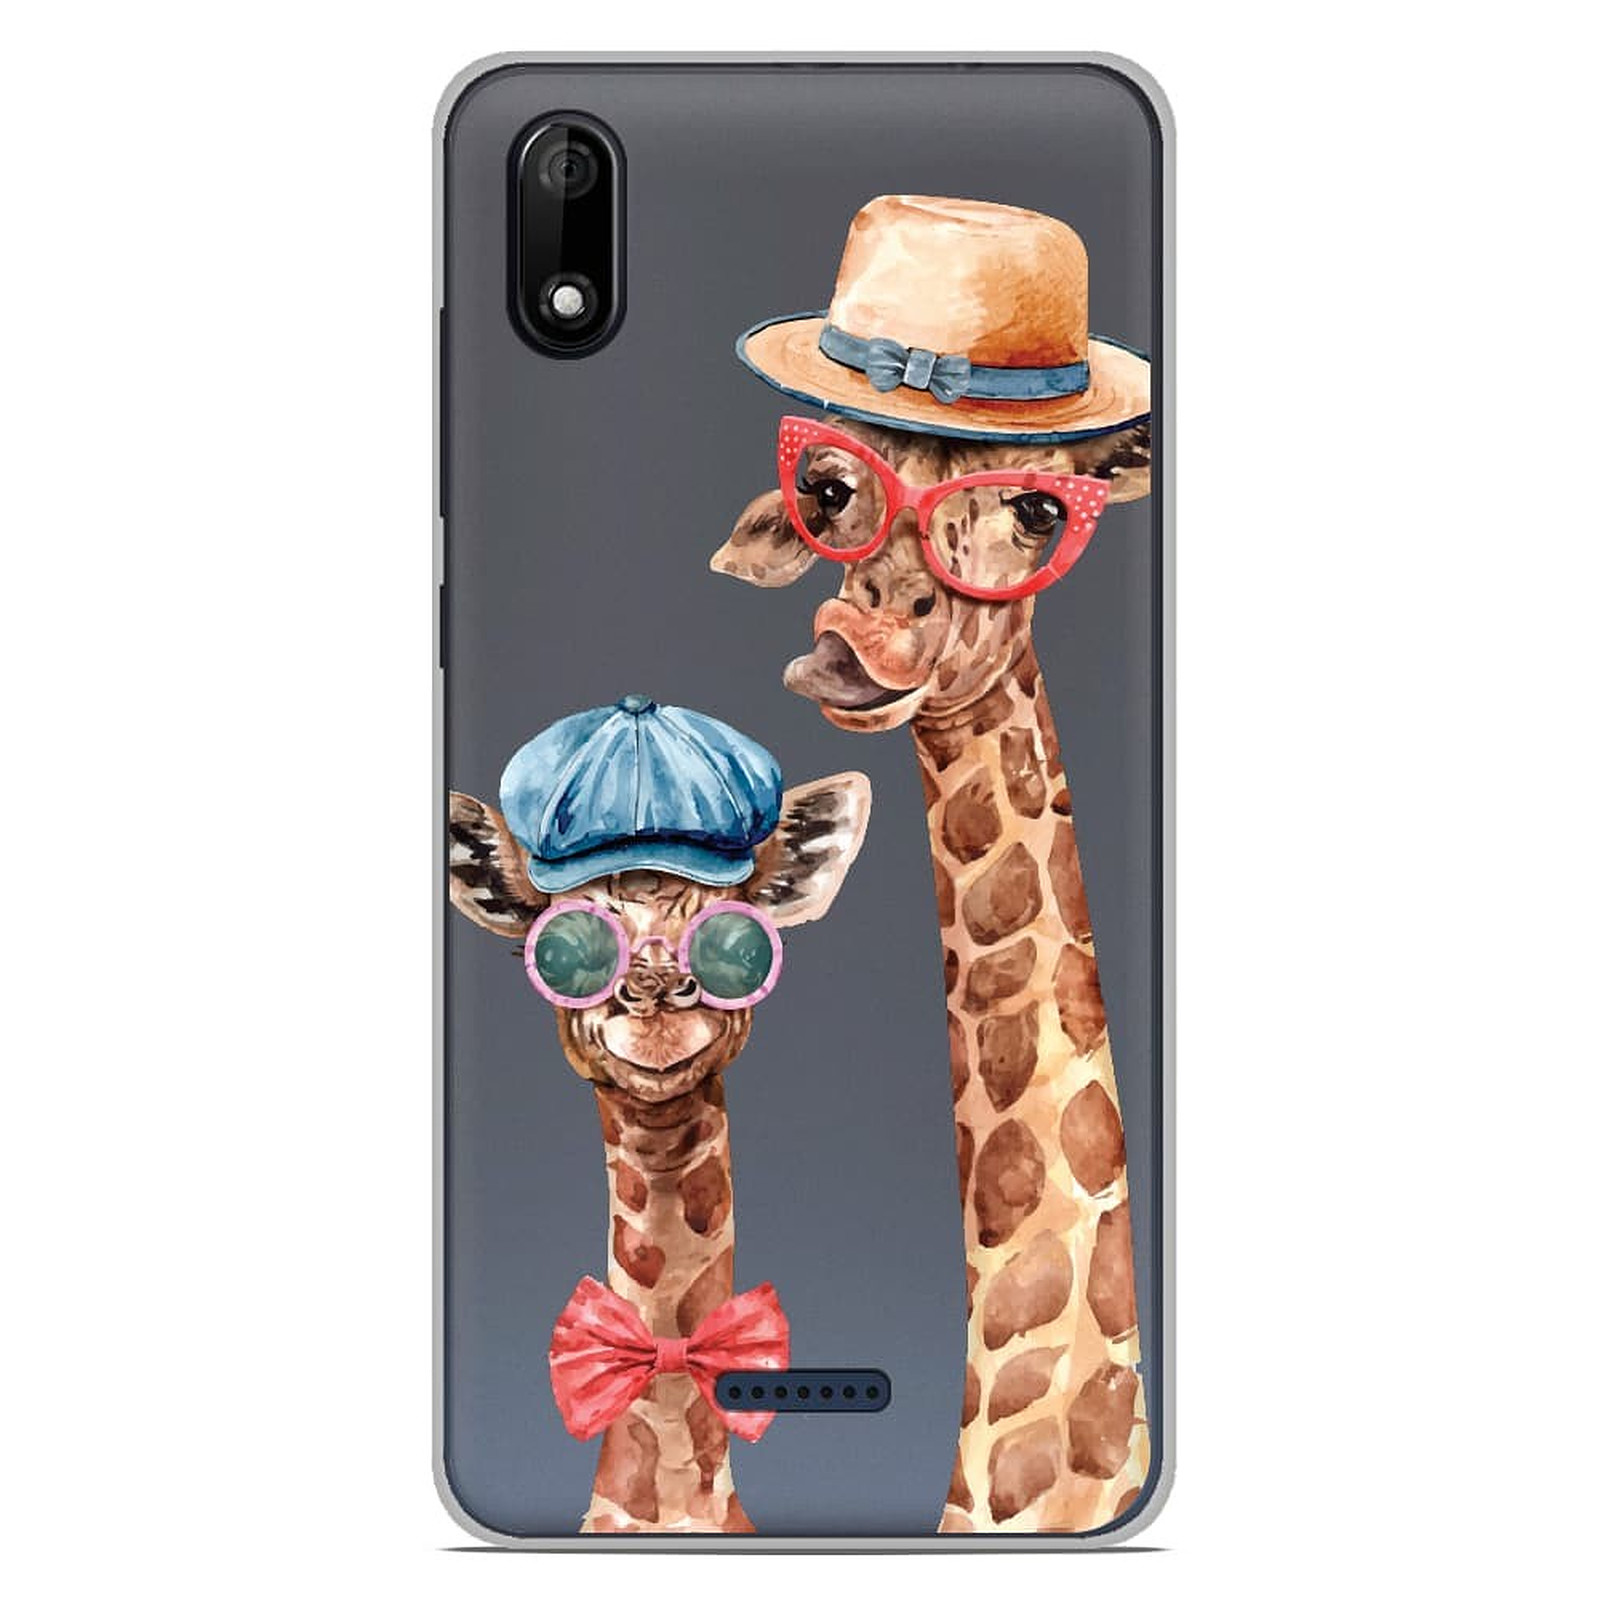 1001 Coques Coque silicone gel Wiko Y60 motif Funny Girafe - Coque telephone 1001Coques